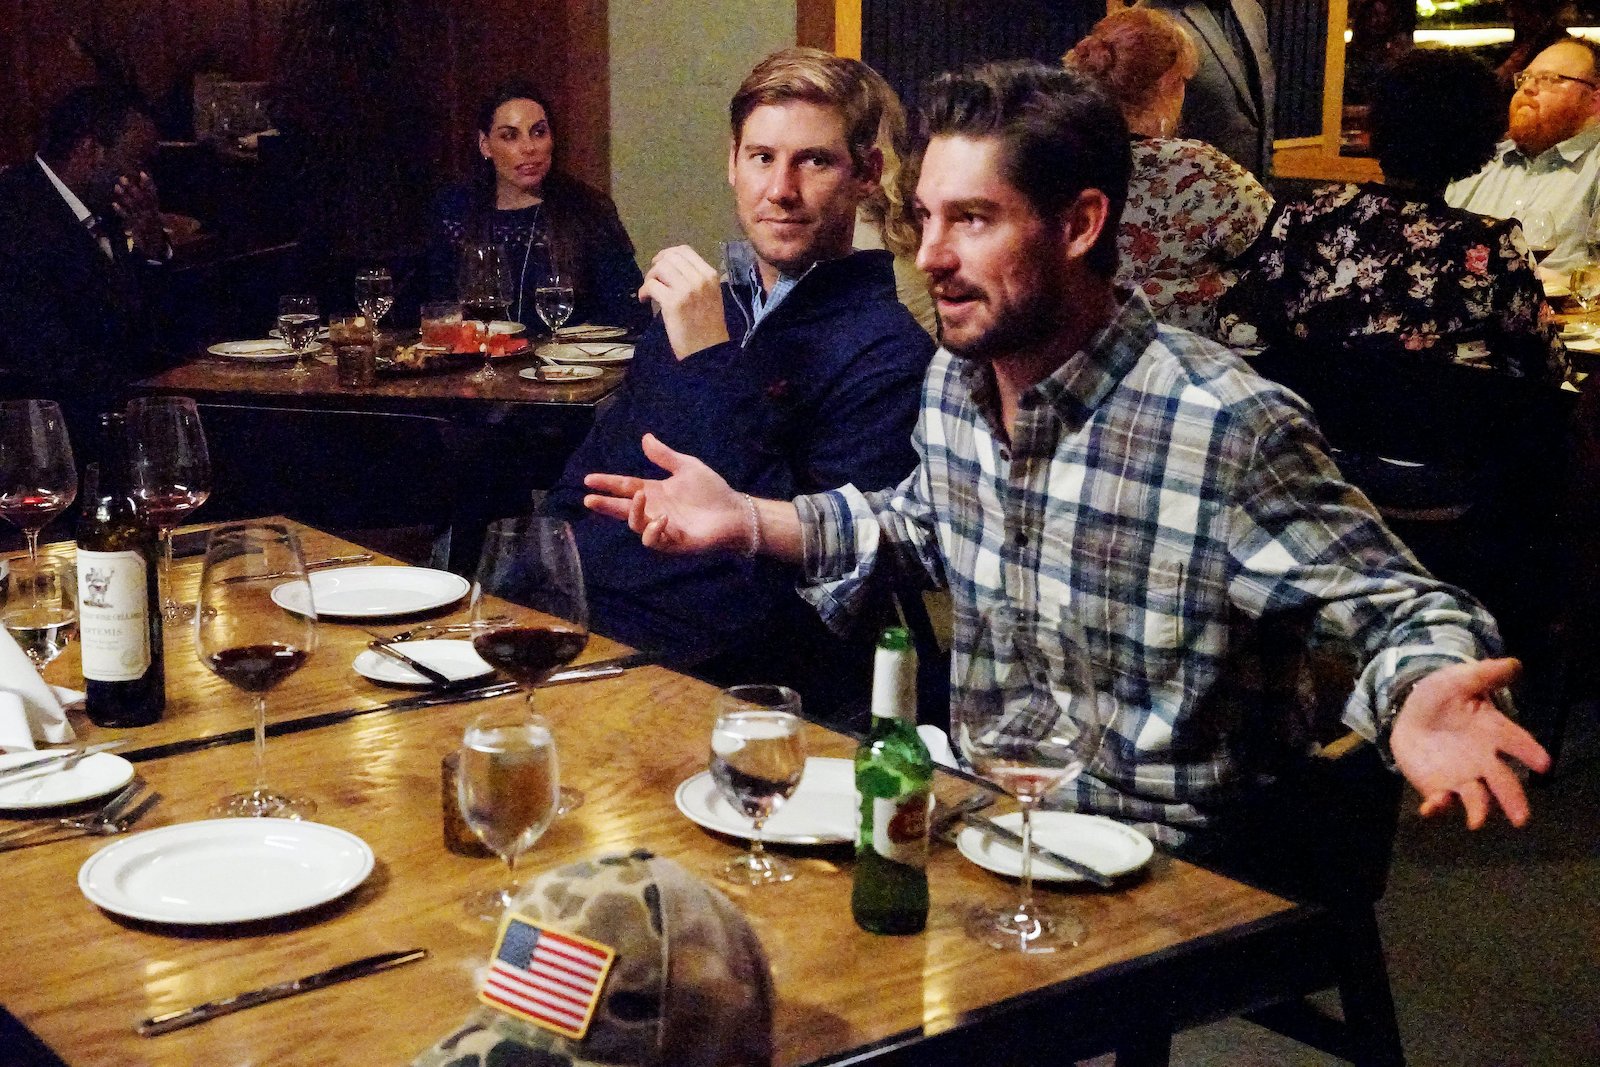 Austen Kroll and Craig Conover have a conversation over dinner and drinks